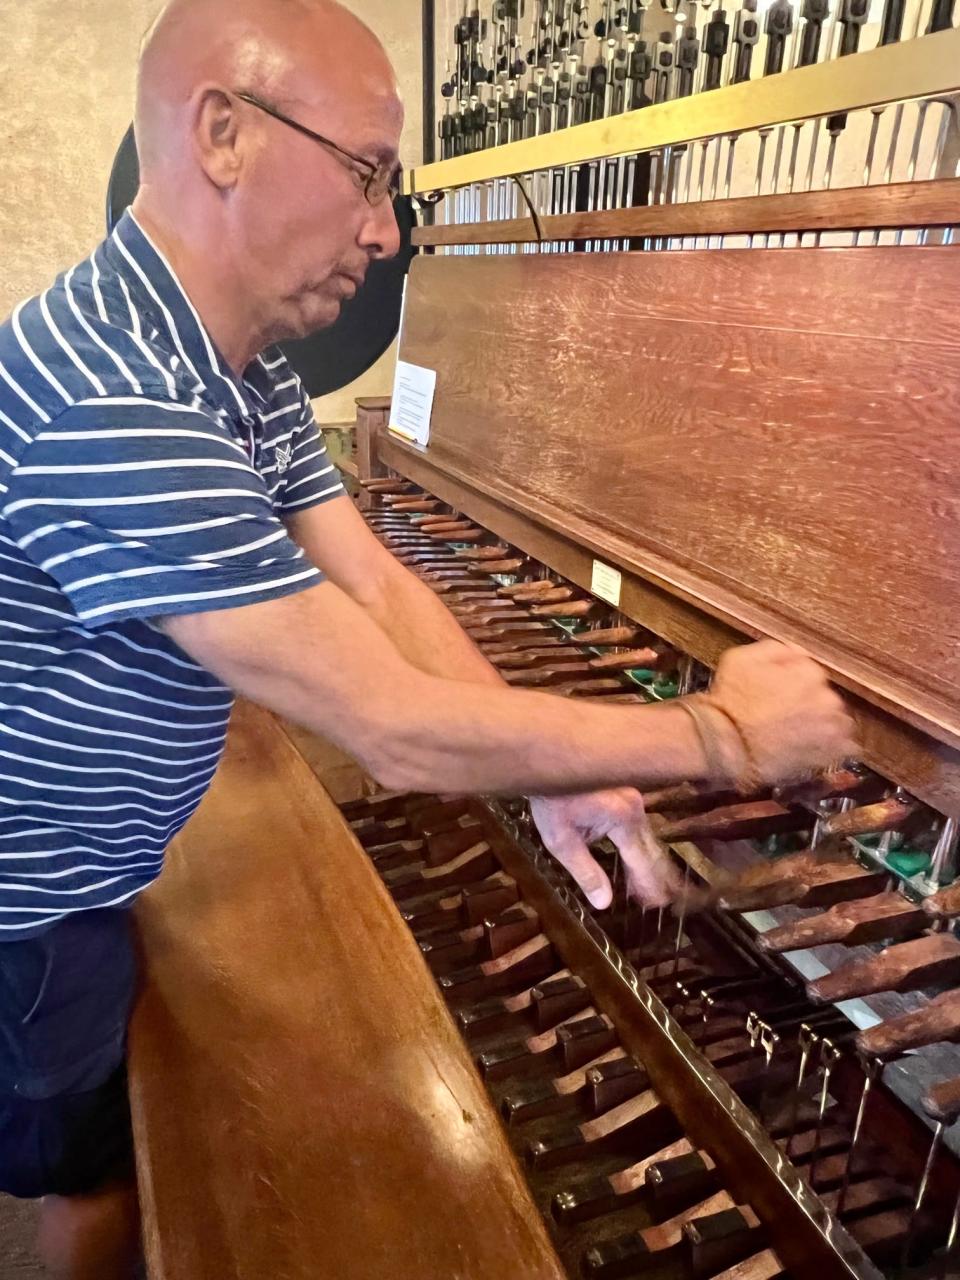 "I do a lot of arrangements, and because I don’t have enough time to write everything down, I do a lot of arranging on the spot – improvising," said Geert D'hollander, carillonneur at Bok Tower Gardens in Lake Wales